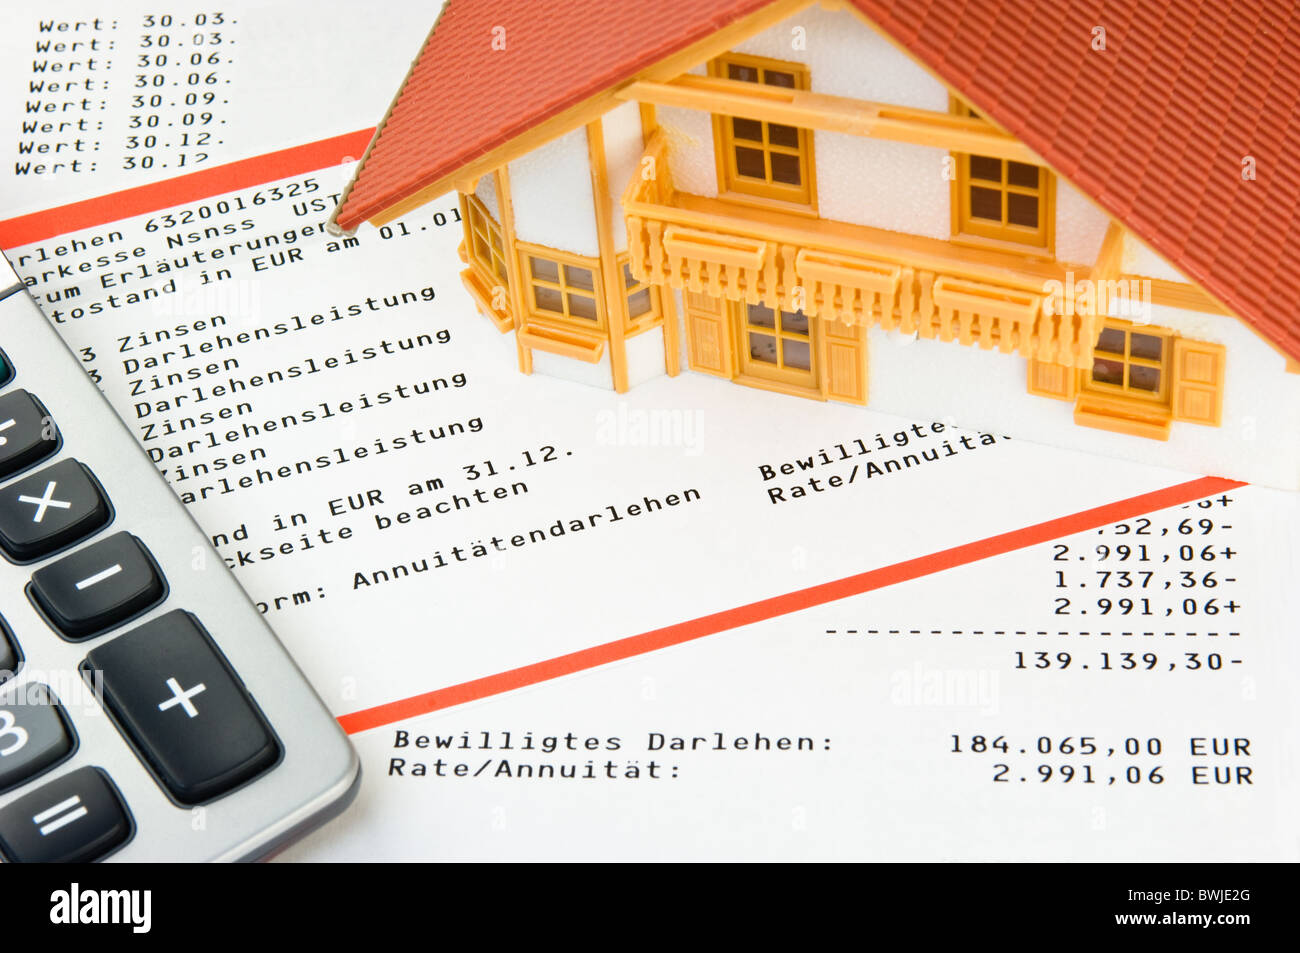 Model house on loans account statement Stock Photo